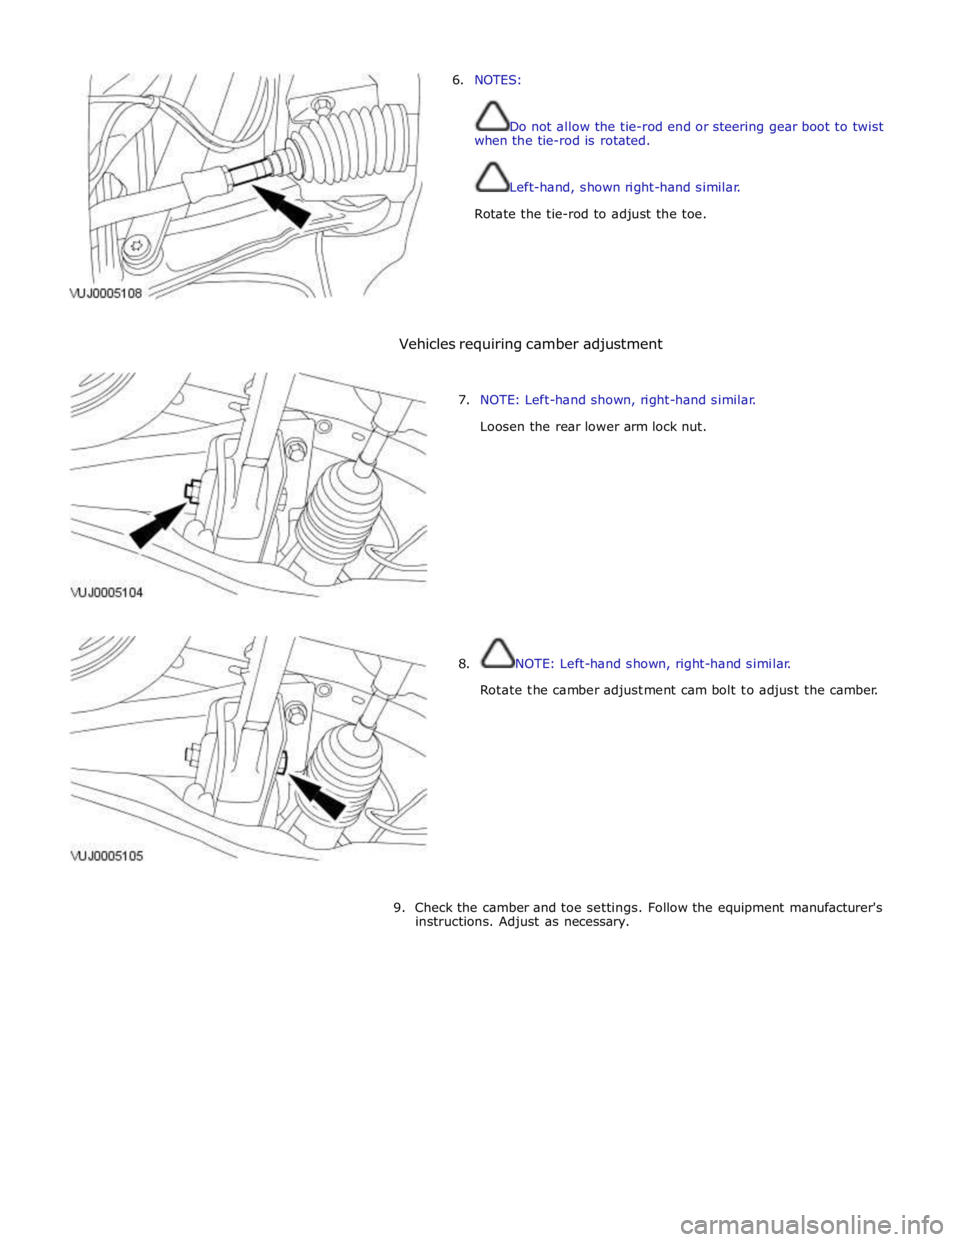 JAGUAR XFR 2010 1.G Workshop Manual 6. NOTES: 
 
 
Do not allow the tie-rod end or steering gear boot to twist 
when the tie-rod is rotated. 
 
 
Left-hand, shown right-hand similar. 
Rotate the tie-rod to adjust the toe. 
 
 
 
 
 
 
V